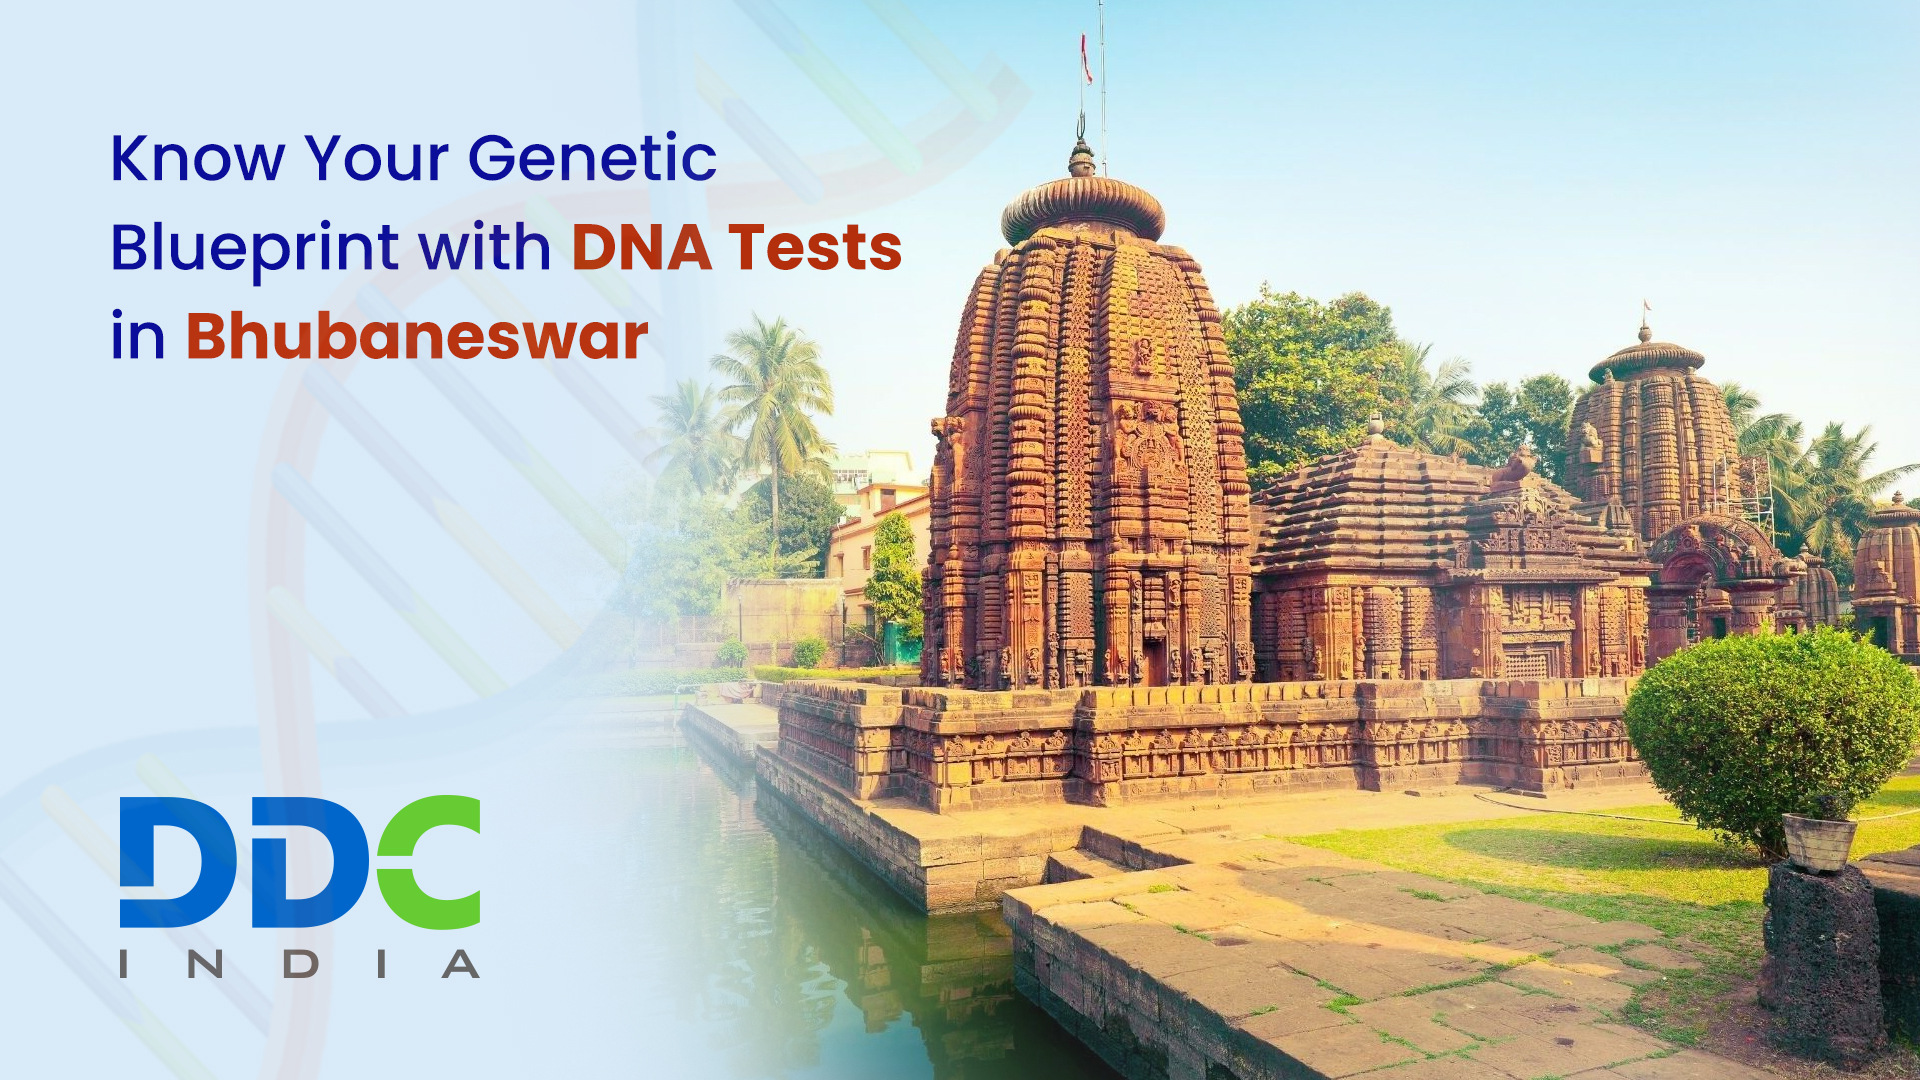 Finding the Reliable Lab for Immigration DNA Tests in Bhubaneswar? - AtoAllinks